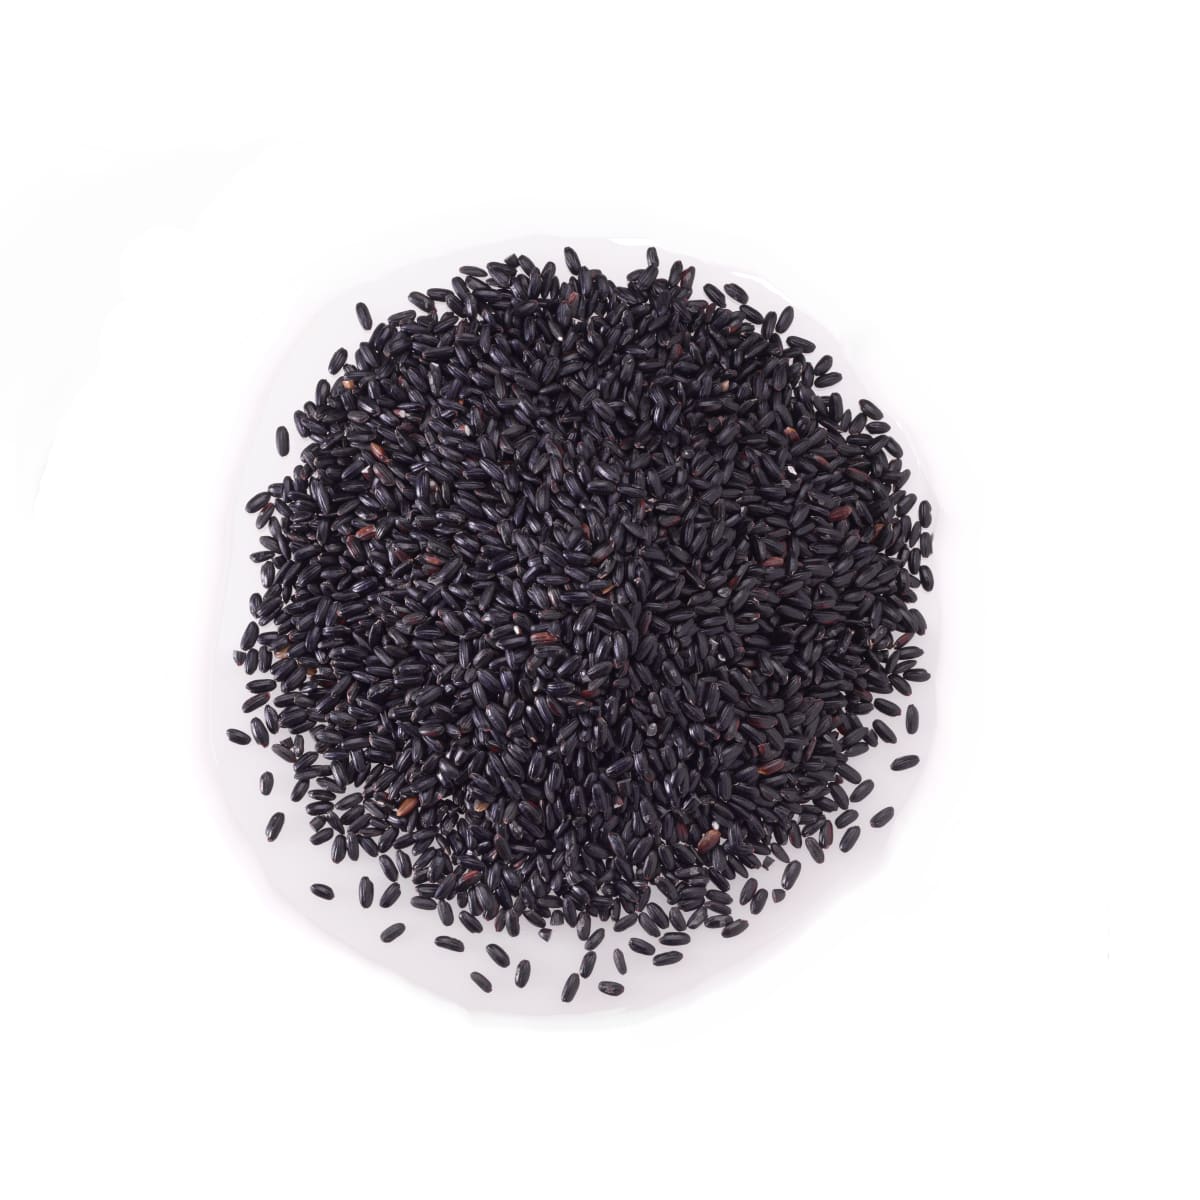 Should You Be Eating Black Rice? %%sep%% %%sitename%% - Men's Journal